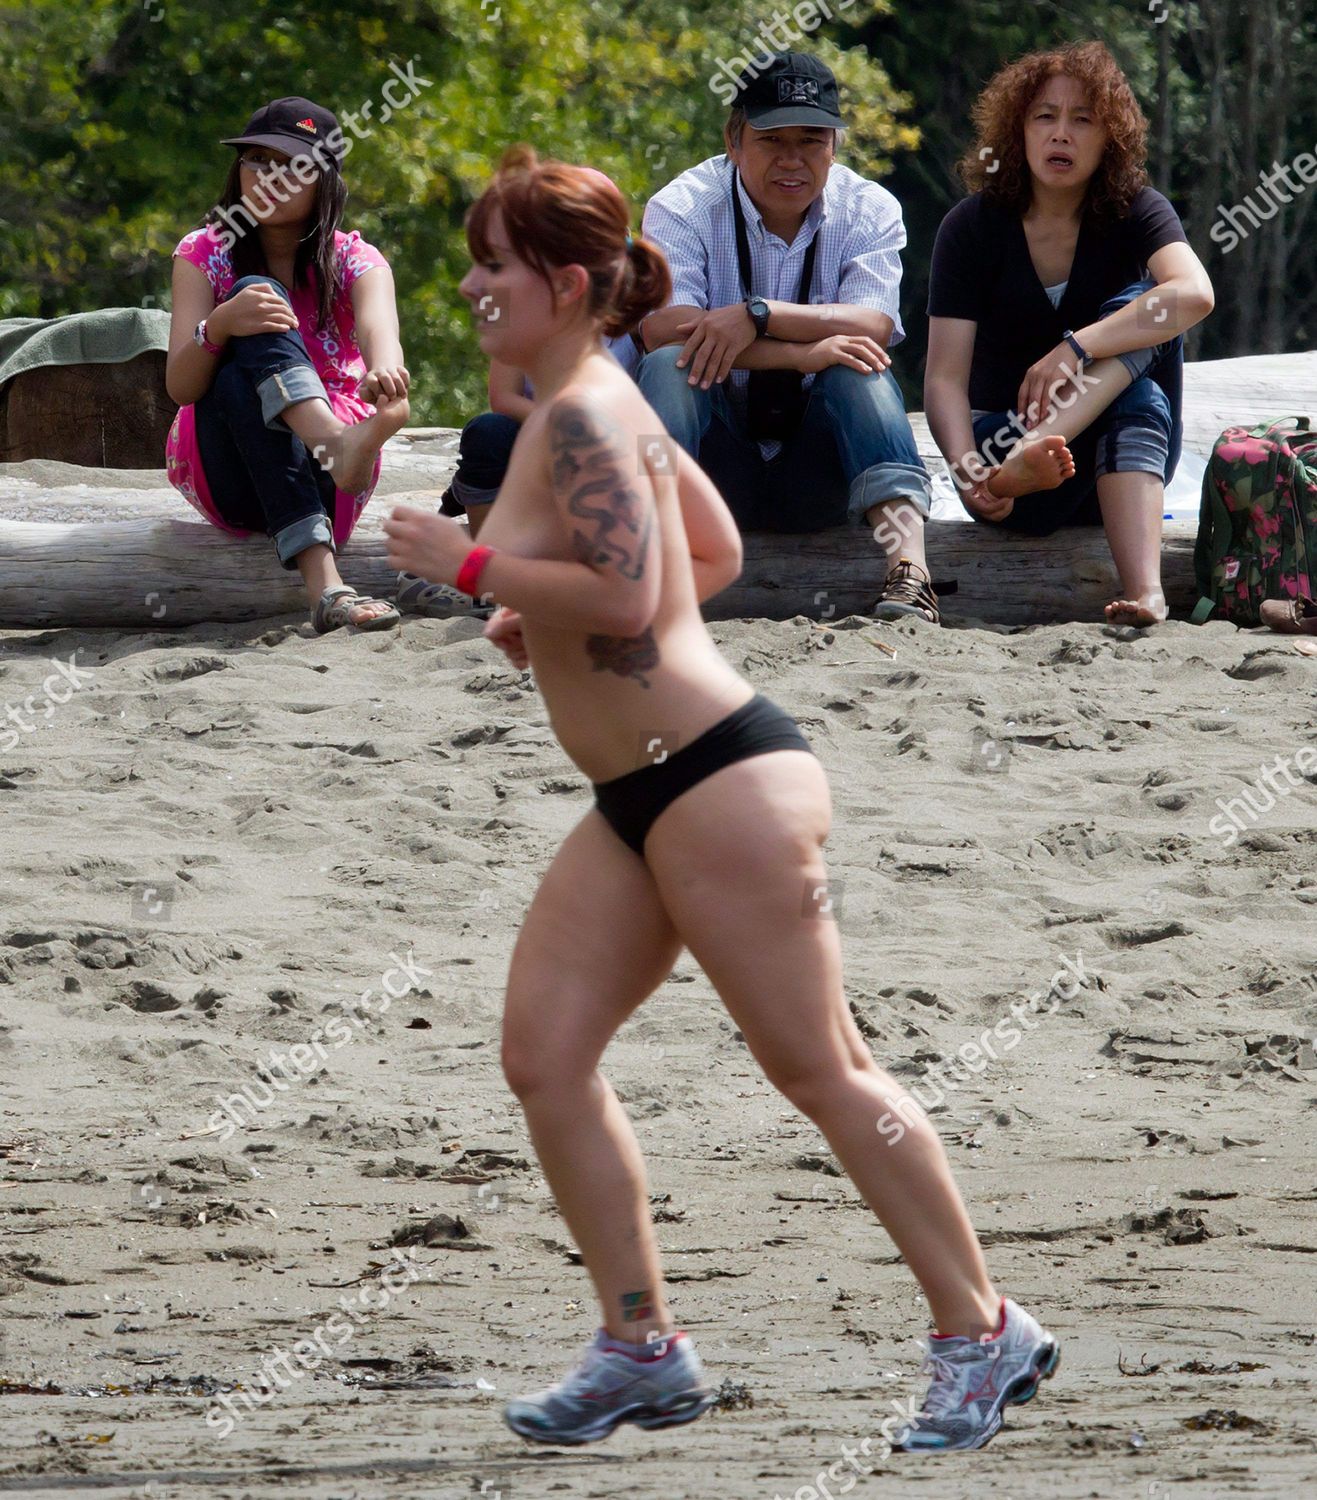 Zdjęcie stockowe: Bare Buns Run at Wreck Beach in Vancouver, Canada - 14 Au...